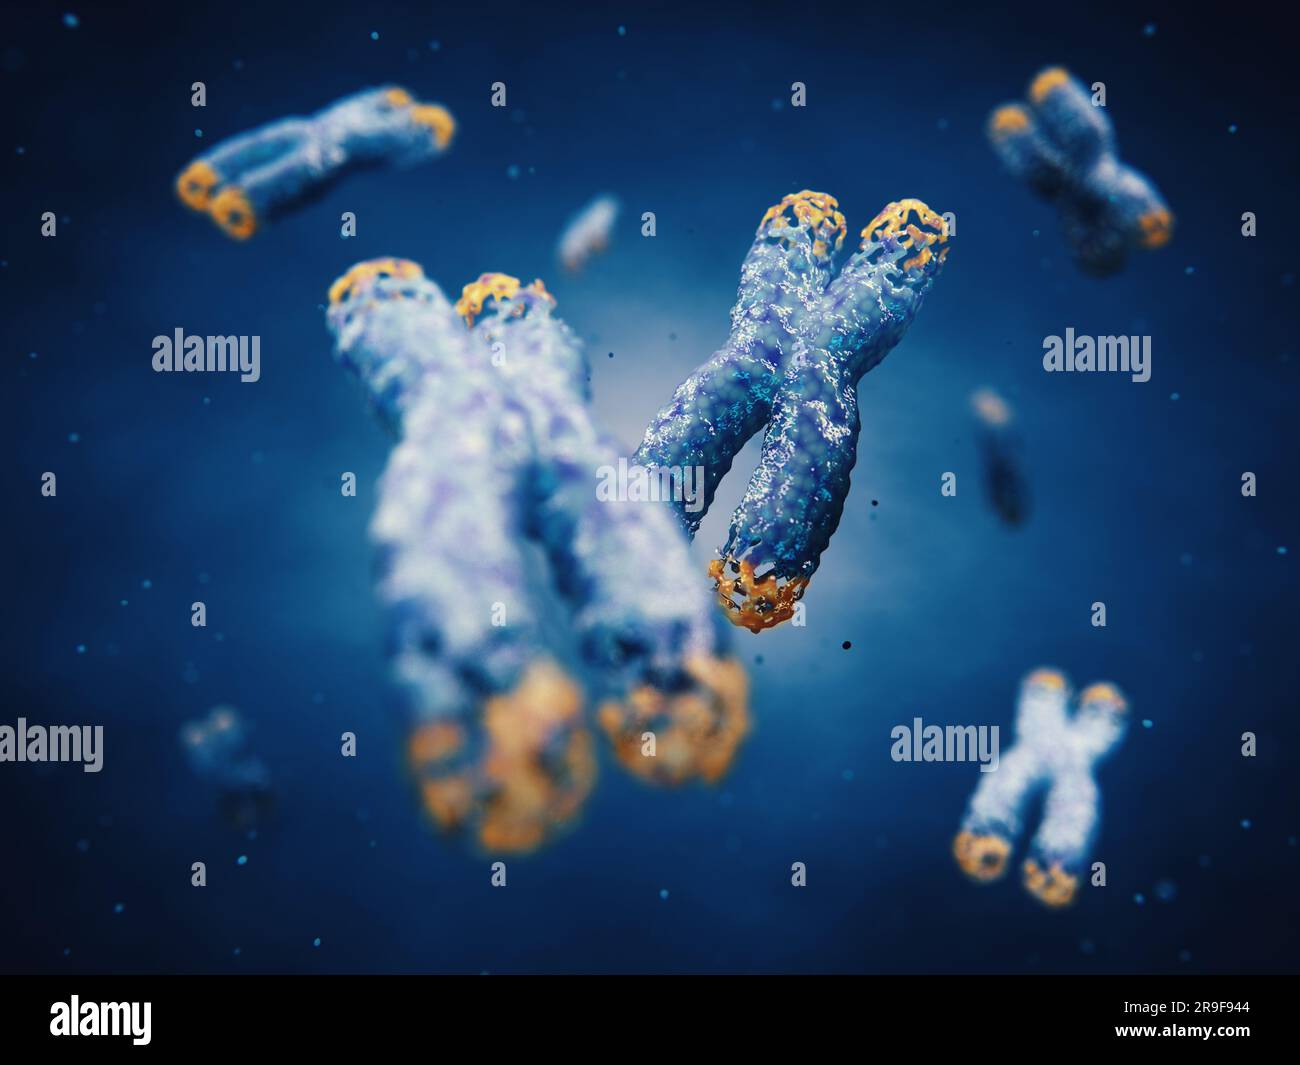 Telomeres are found on both ends of chromosomes. Telomere length is affected by lifestyle and has direct impact on human health and lifespan. Stock Photo